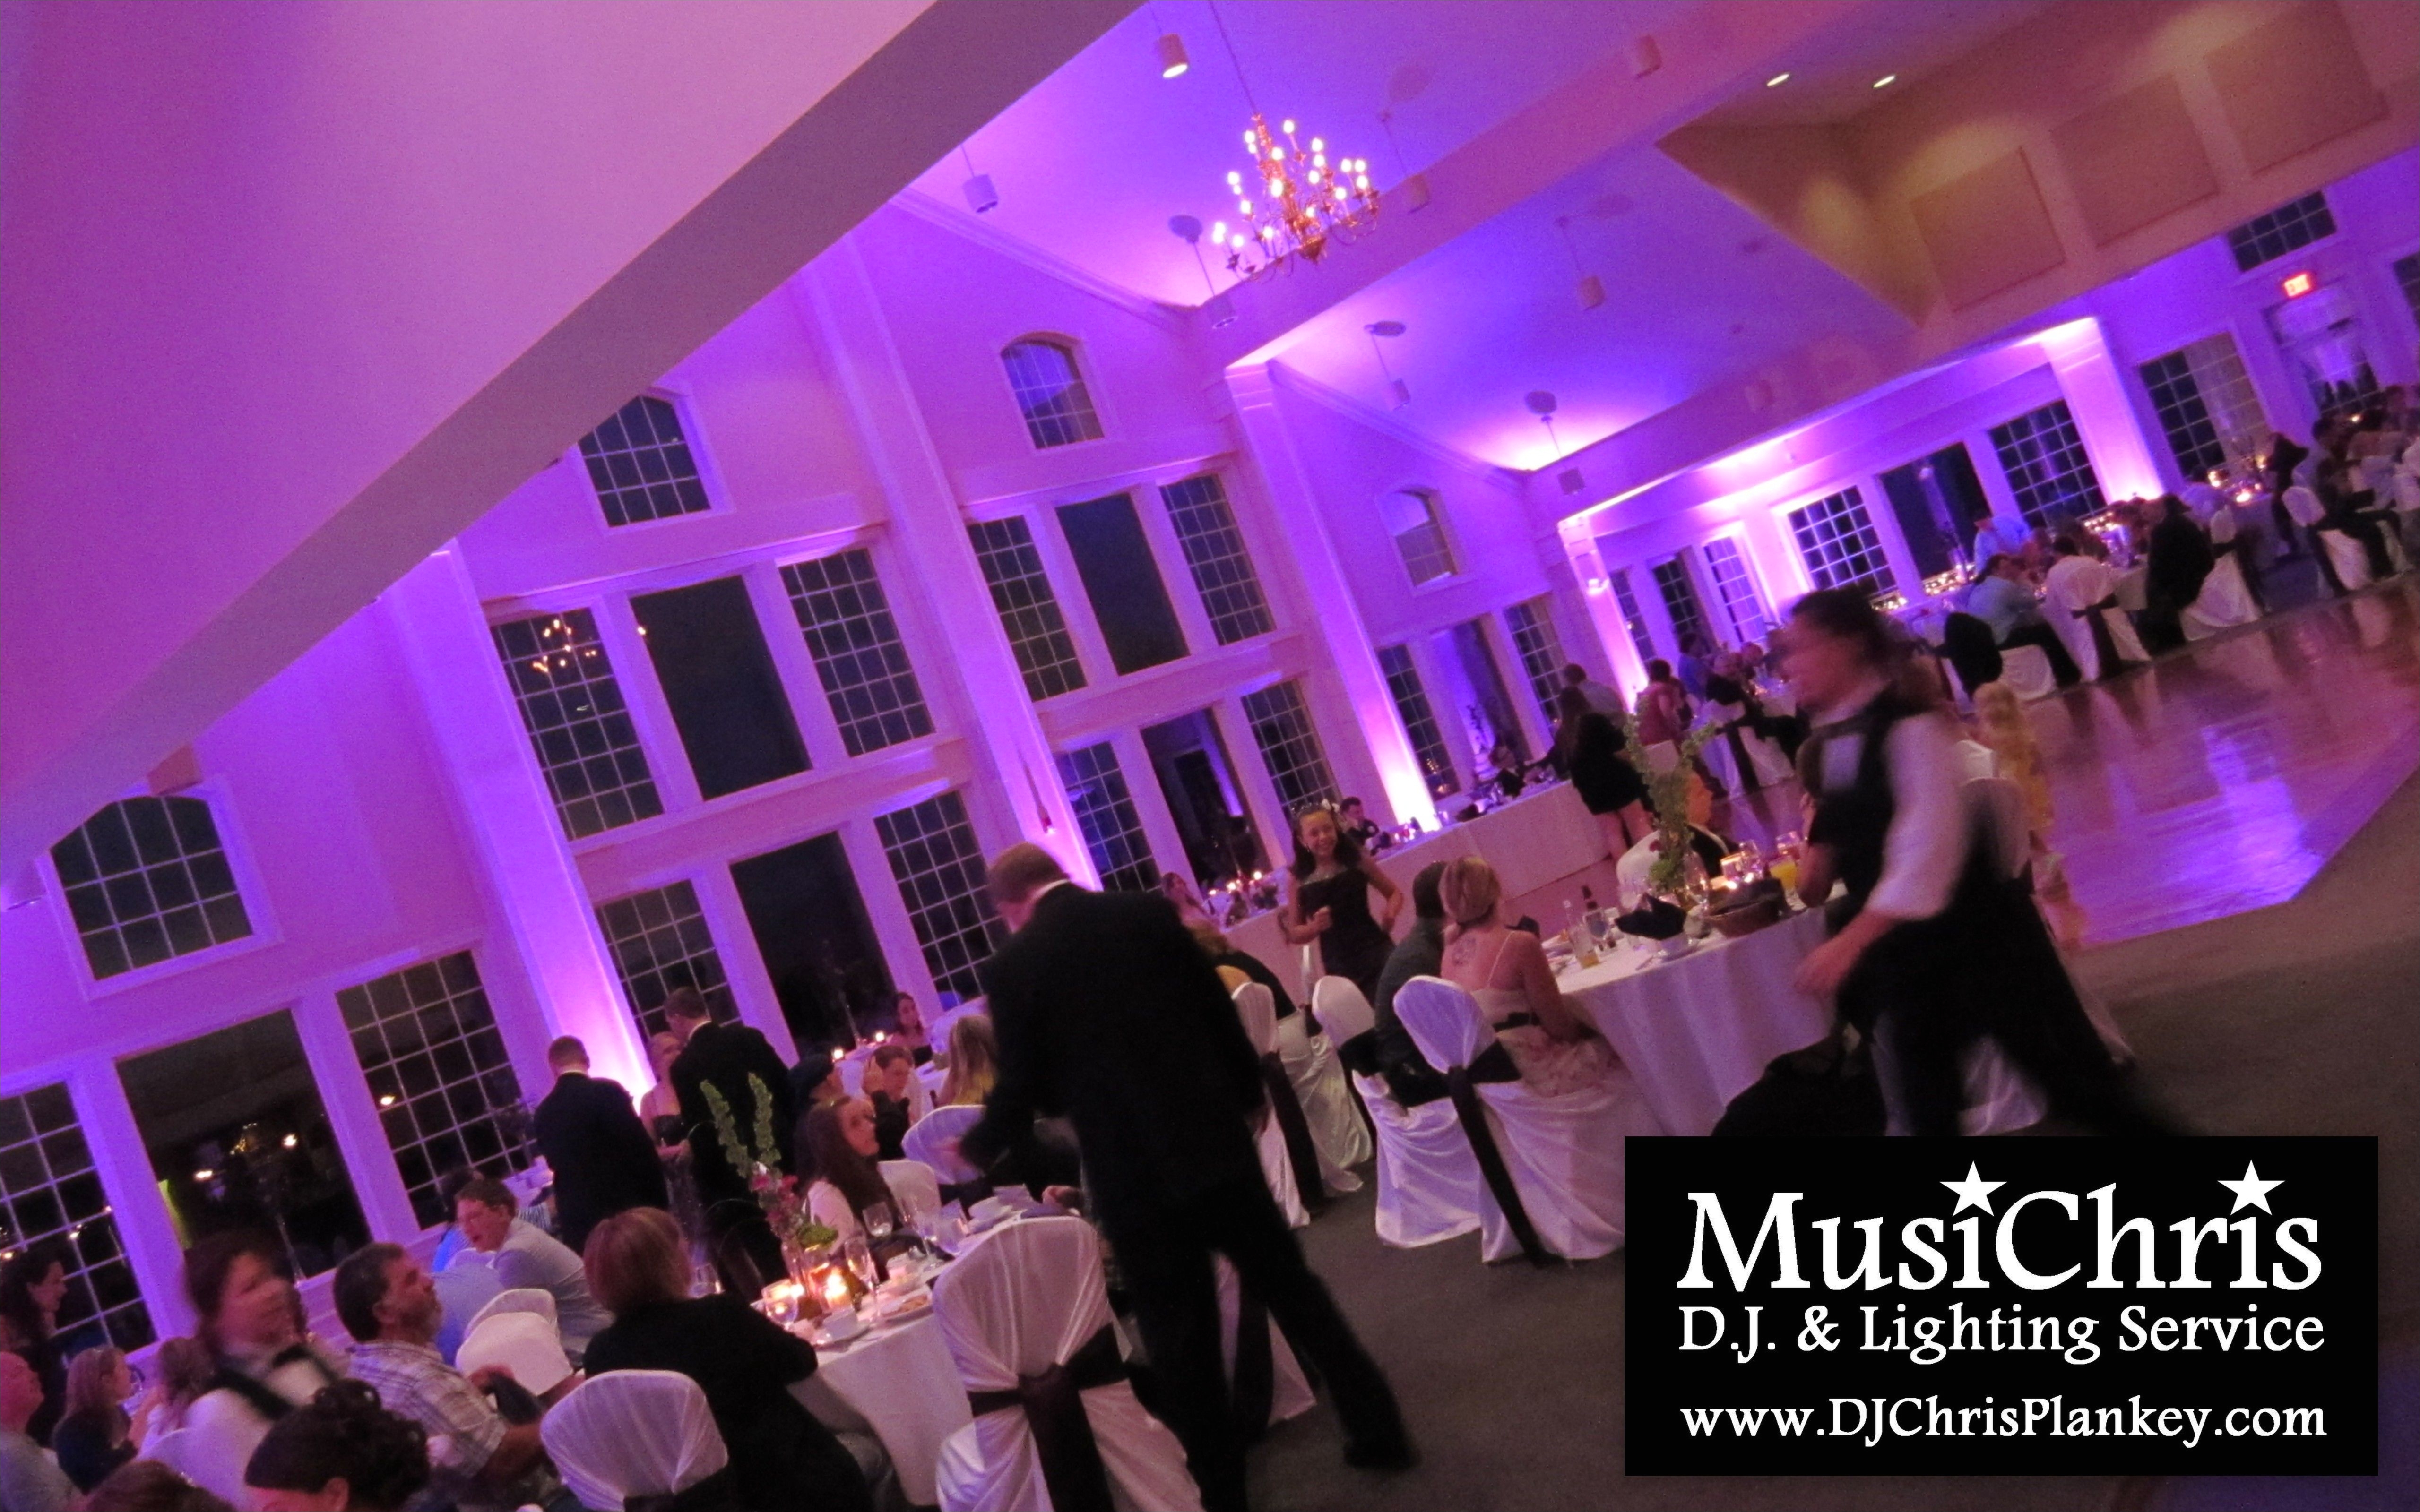 magenta wedding uplighting at the berkshire hills country club by musichris dj and lighting service